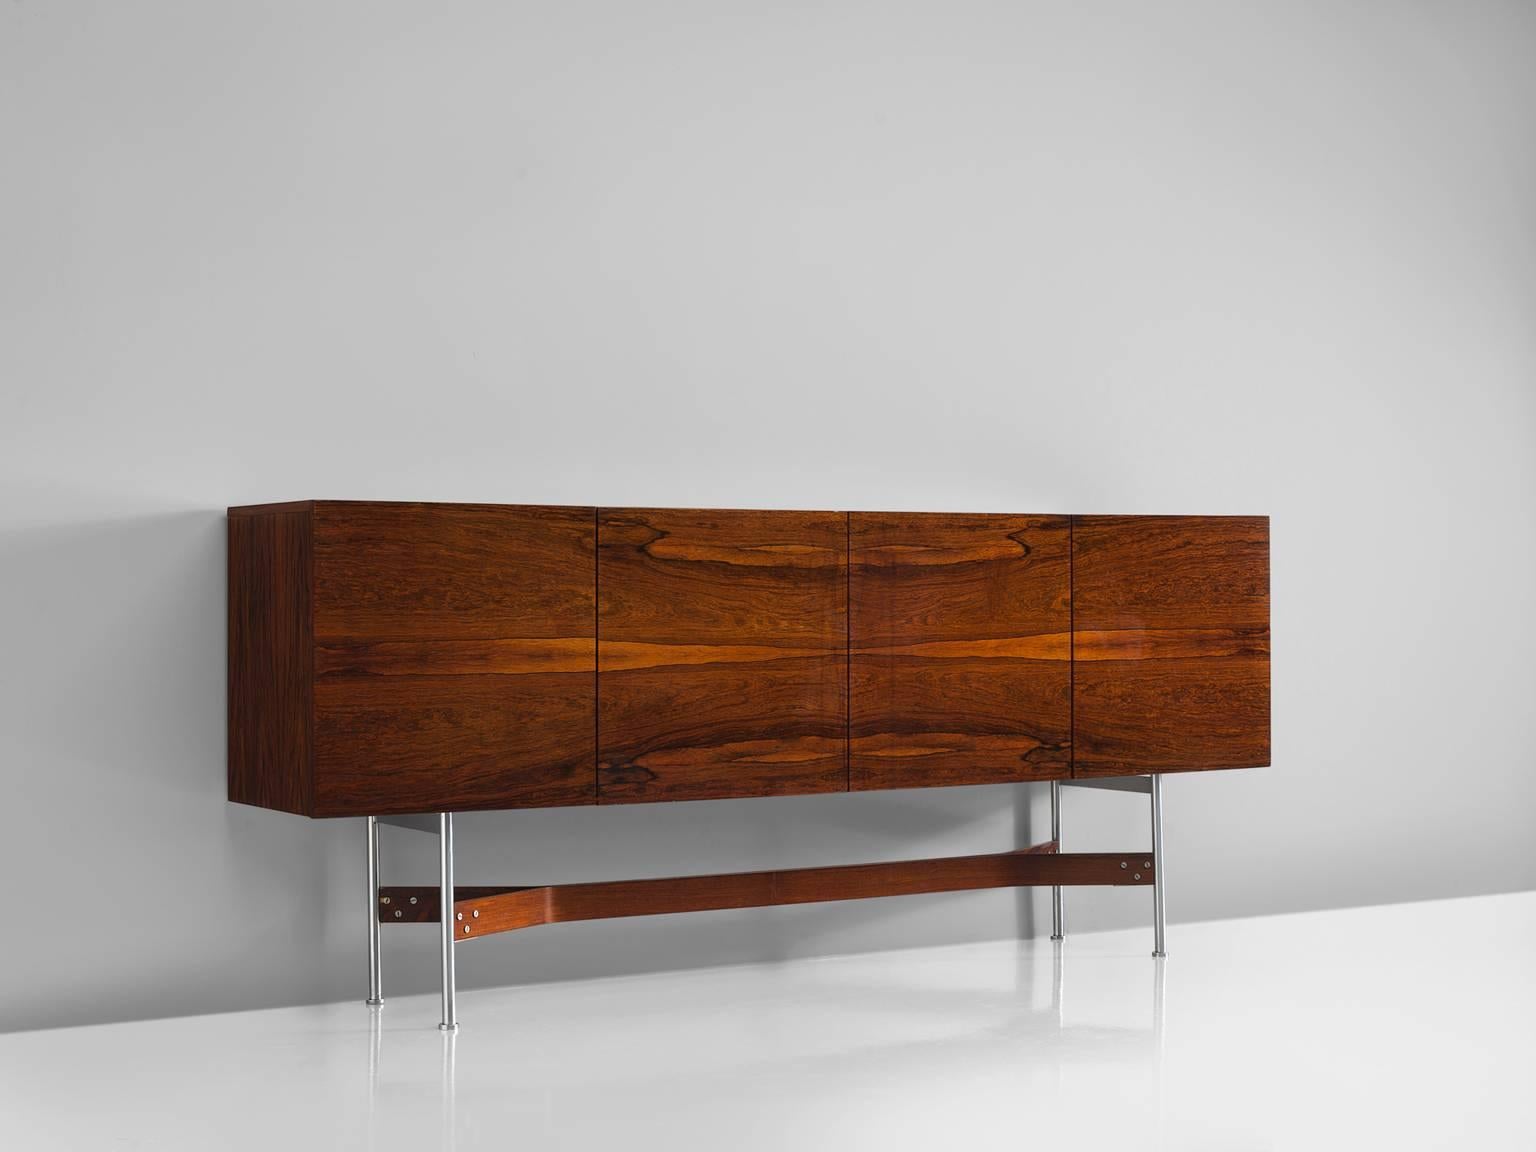 Sideboard, in rosewood and metal by Rudolf Bernd Glatzel for Fristho Franeker, the Netherlands, 1962. 

This high board is designed by Rudolf Bernd Glatzel for Fristho. The sideboard shows refined crafted details with a bookmatched front. One of